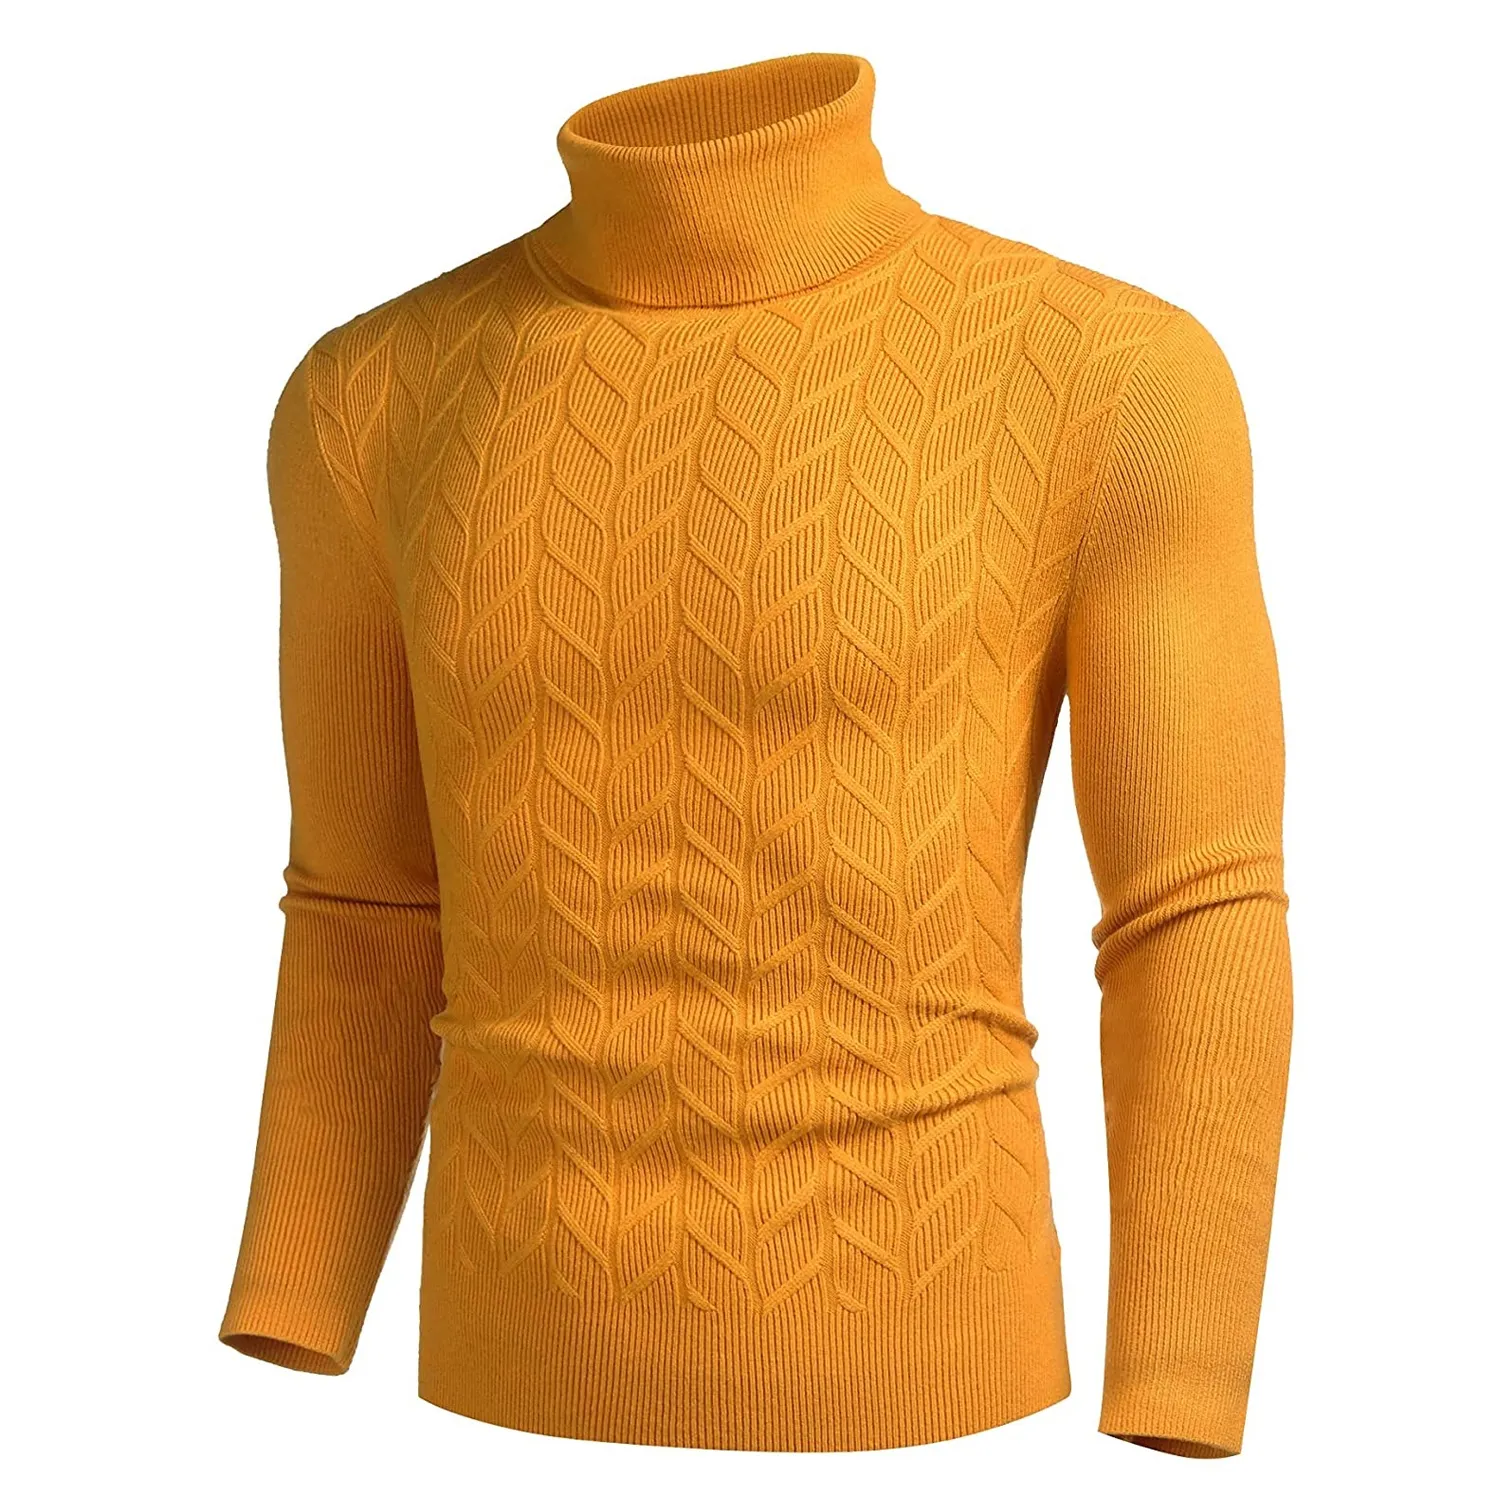 Men's Solid Pullover Turtleneck Twisted Knit Sweater Warm And Soft Fabric Wool And Nylon Long Sleeve Casual Sweater